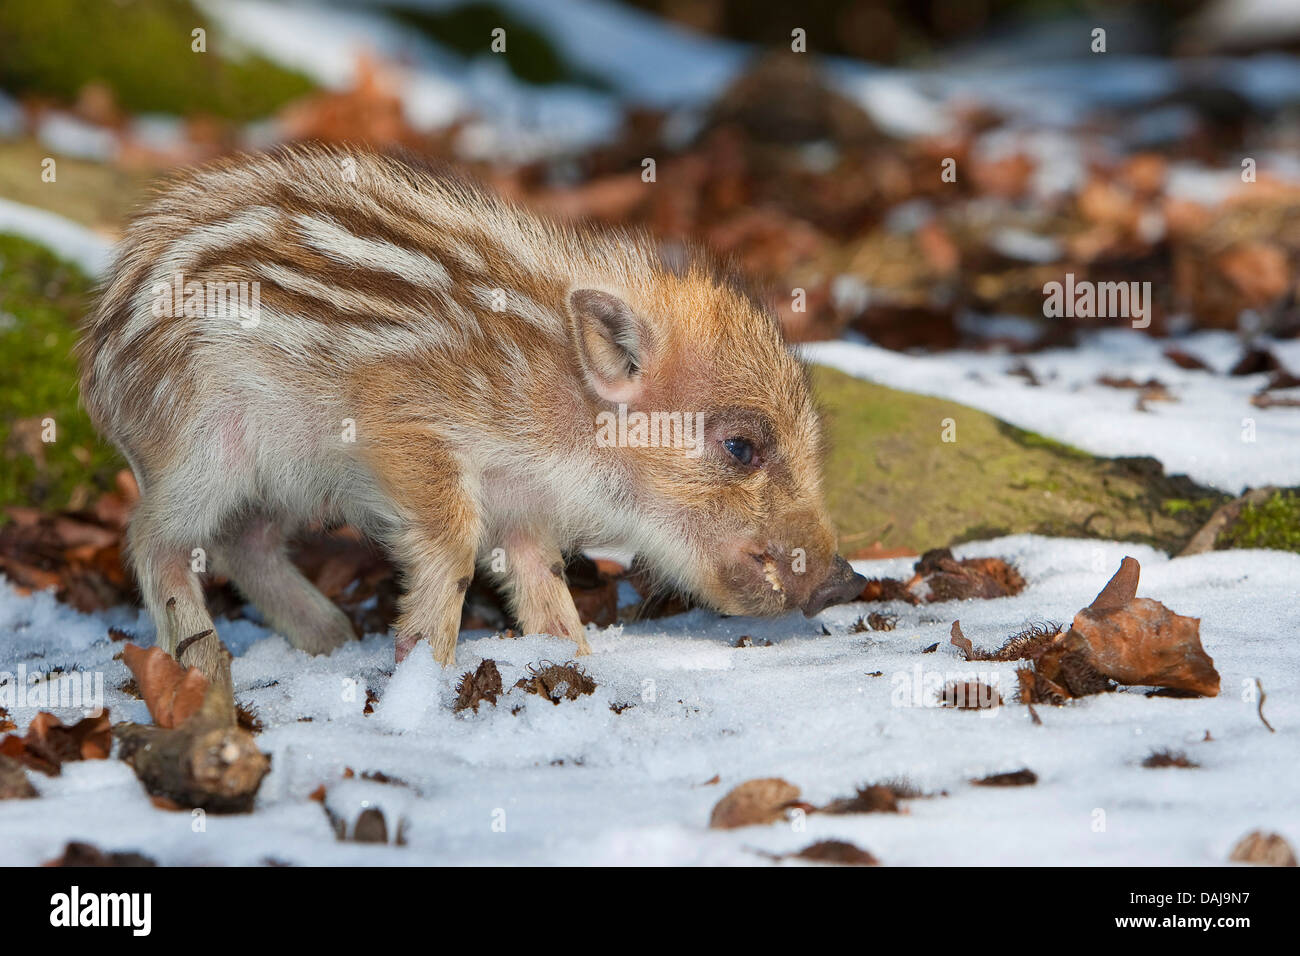 wild boar, pig, wild boar (Sus scrofa), shote sniffing in the snow, Germany Stock Photo